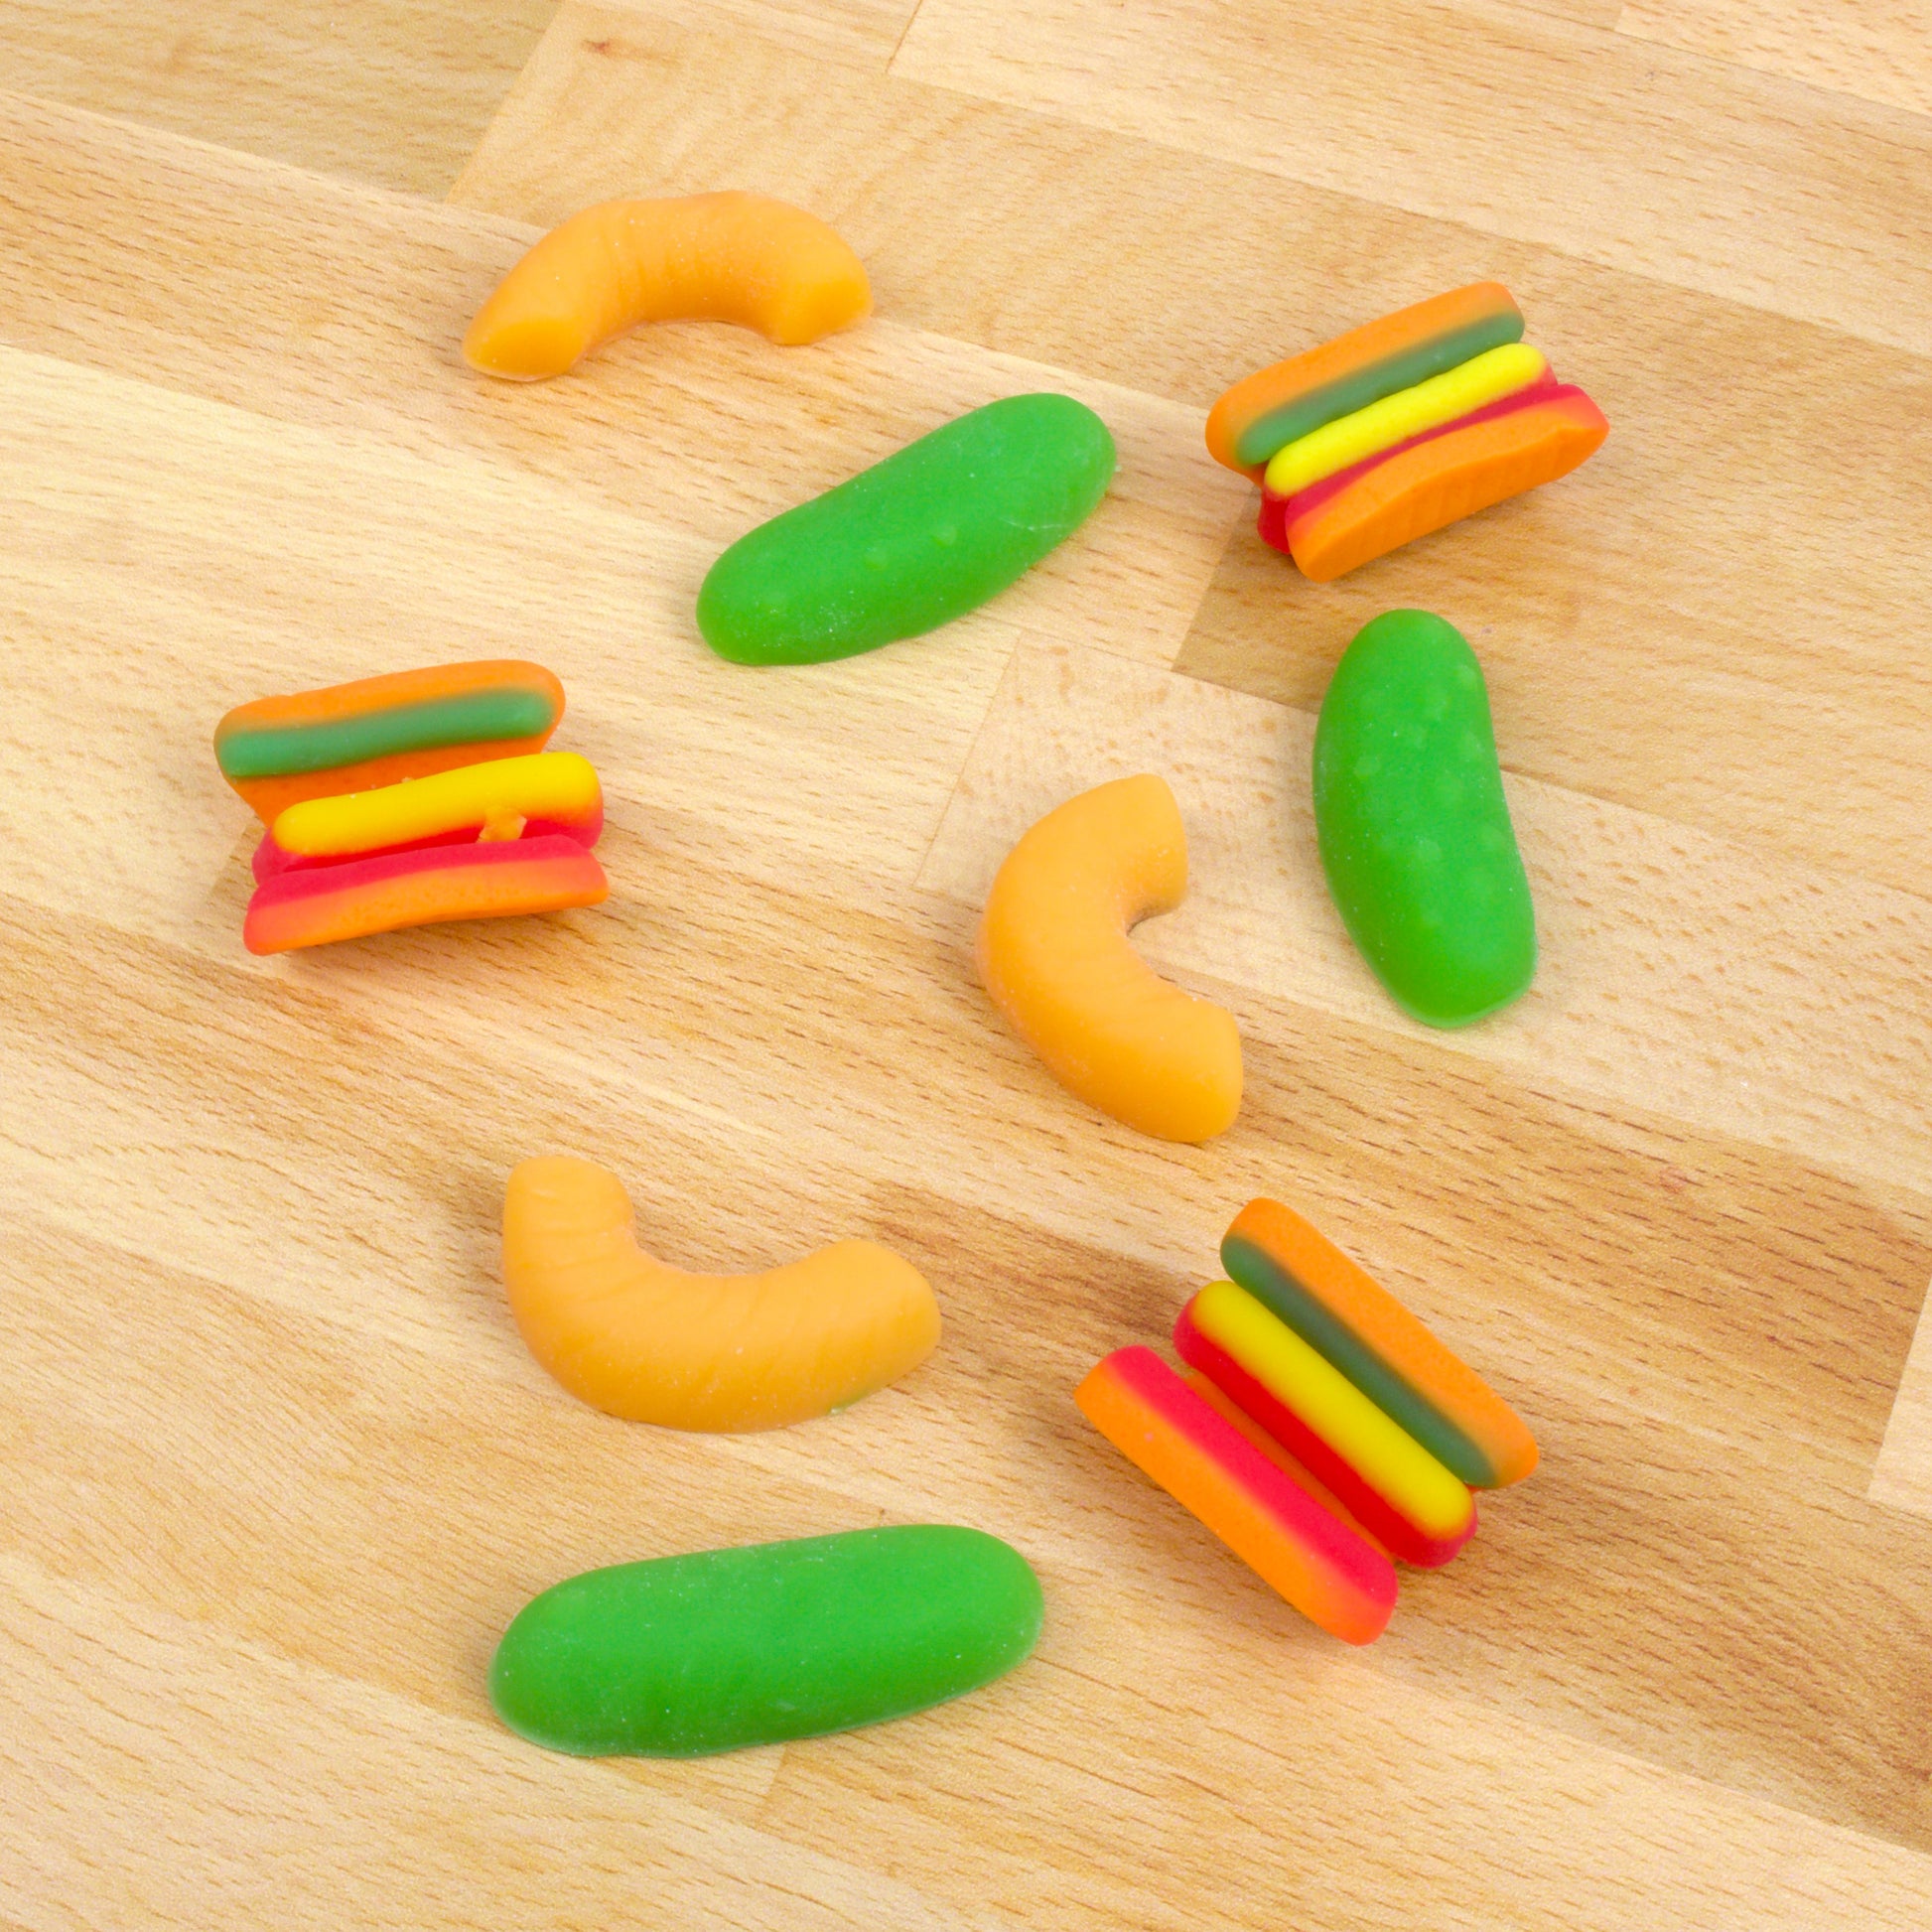 pickle, hot dog, and mac and cheese shaped gummies on hardwood